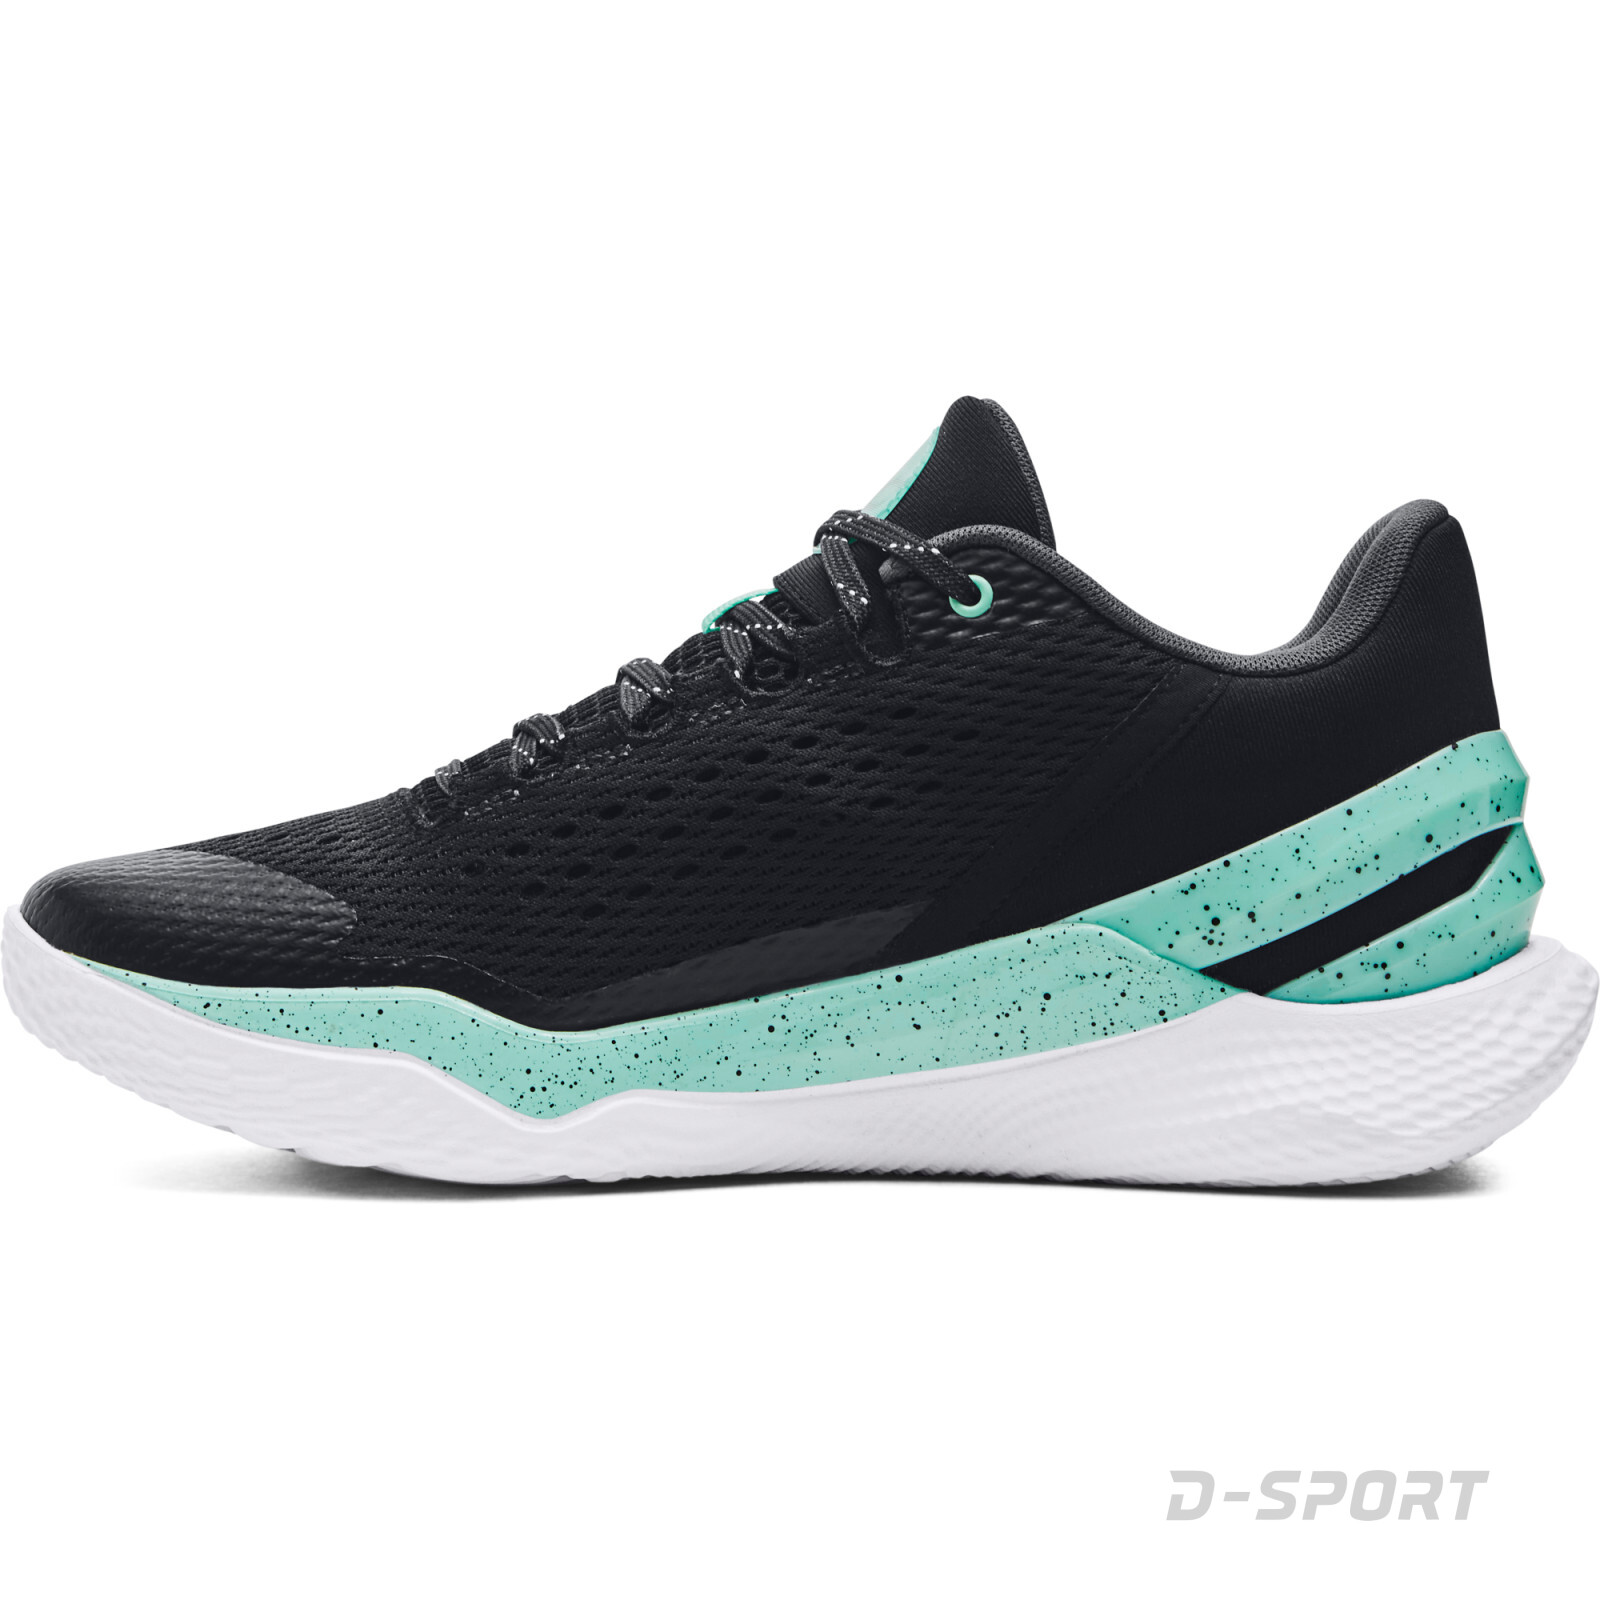 Under Armour CURRY 2 LOW FLOTRO